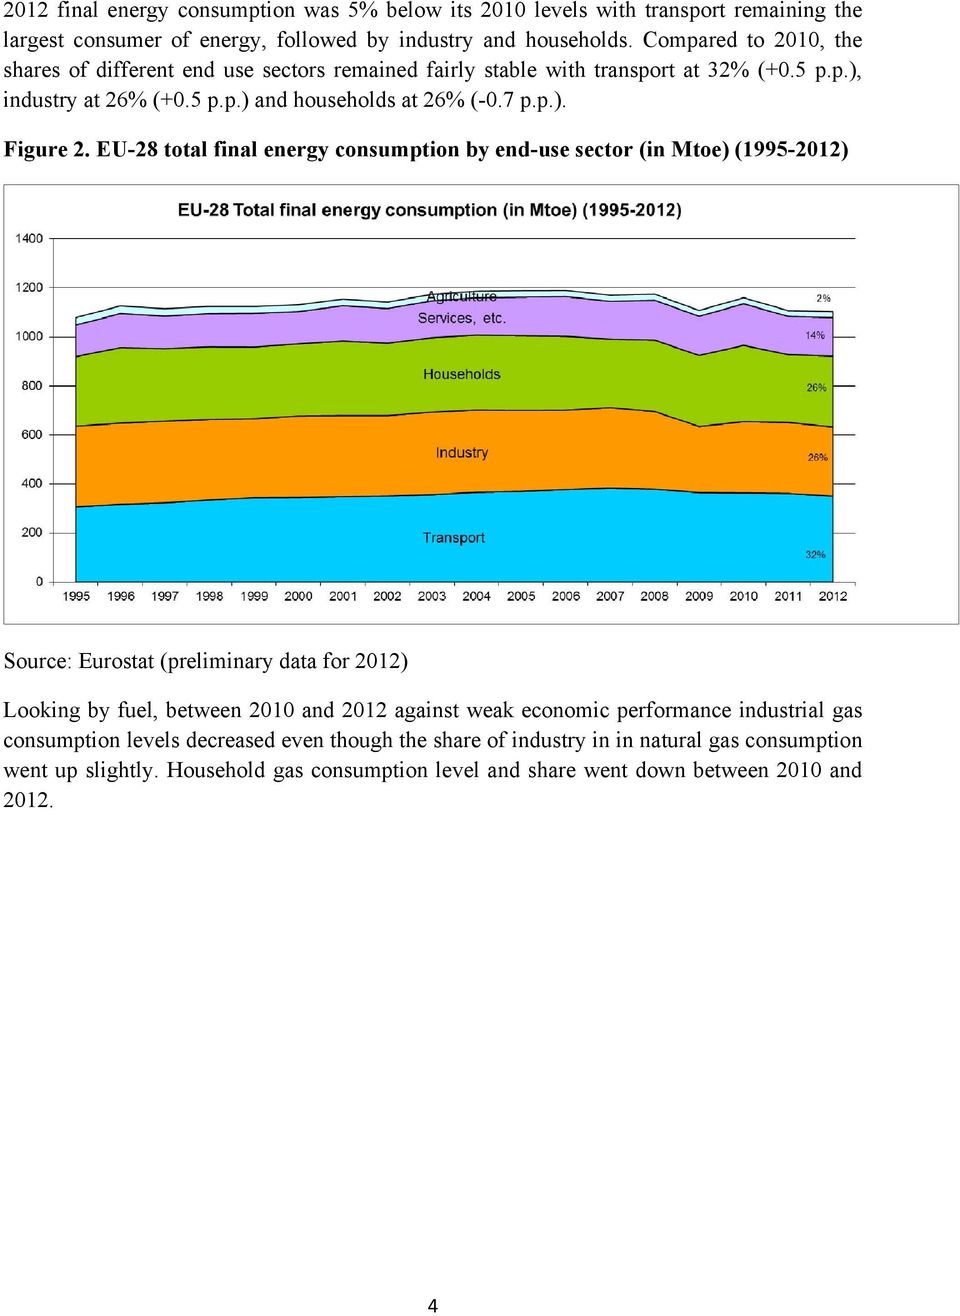 EU-28 total final energy consumption by end-use sector (in Mtoe) (1995-2012) Source: Eurostat (preliminary data for 2012) Looking by fuel, between 2010 and 2012 against weak economic